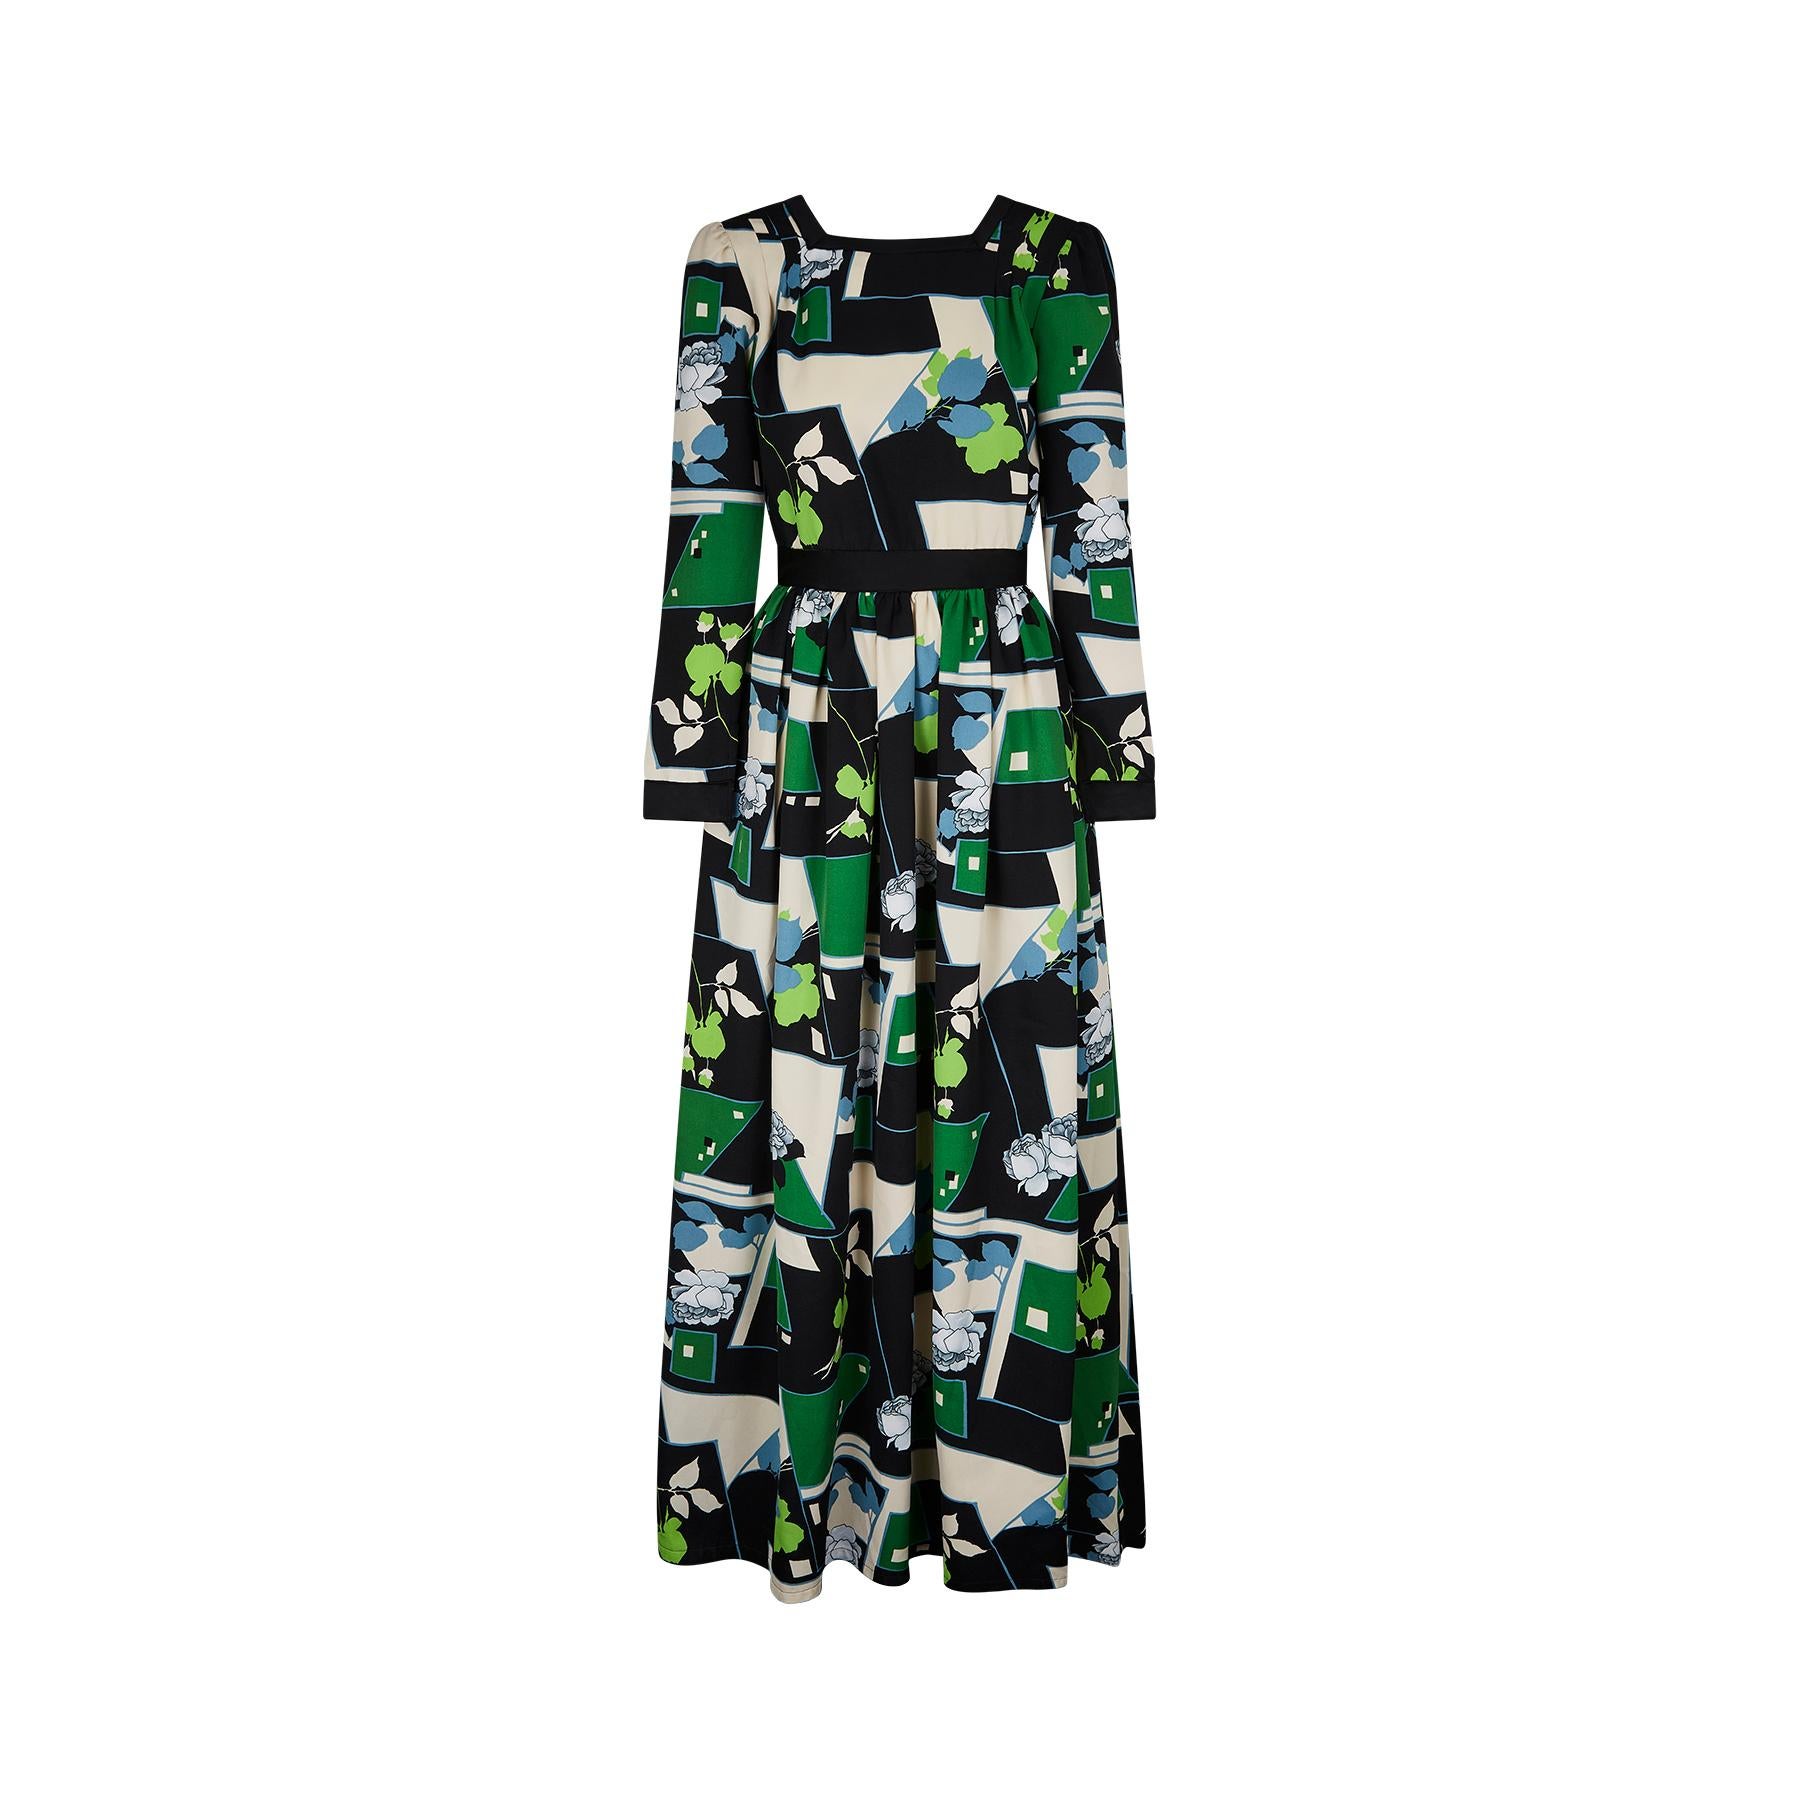 This late 1960s to early 1970s rose print maxi dress is by the renowned British designer John Bates who traded under the Jean Varon label. The striking print combines colours of navy blue, sky blue, green, acid green and white. It has a square neck,